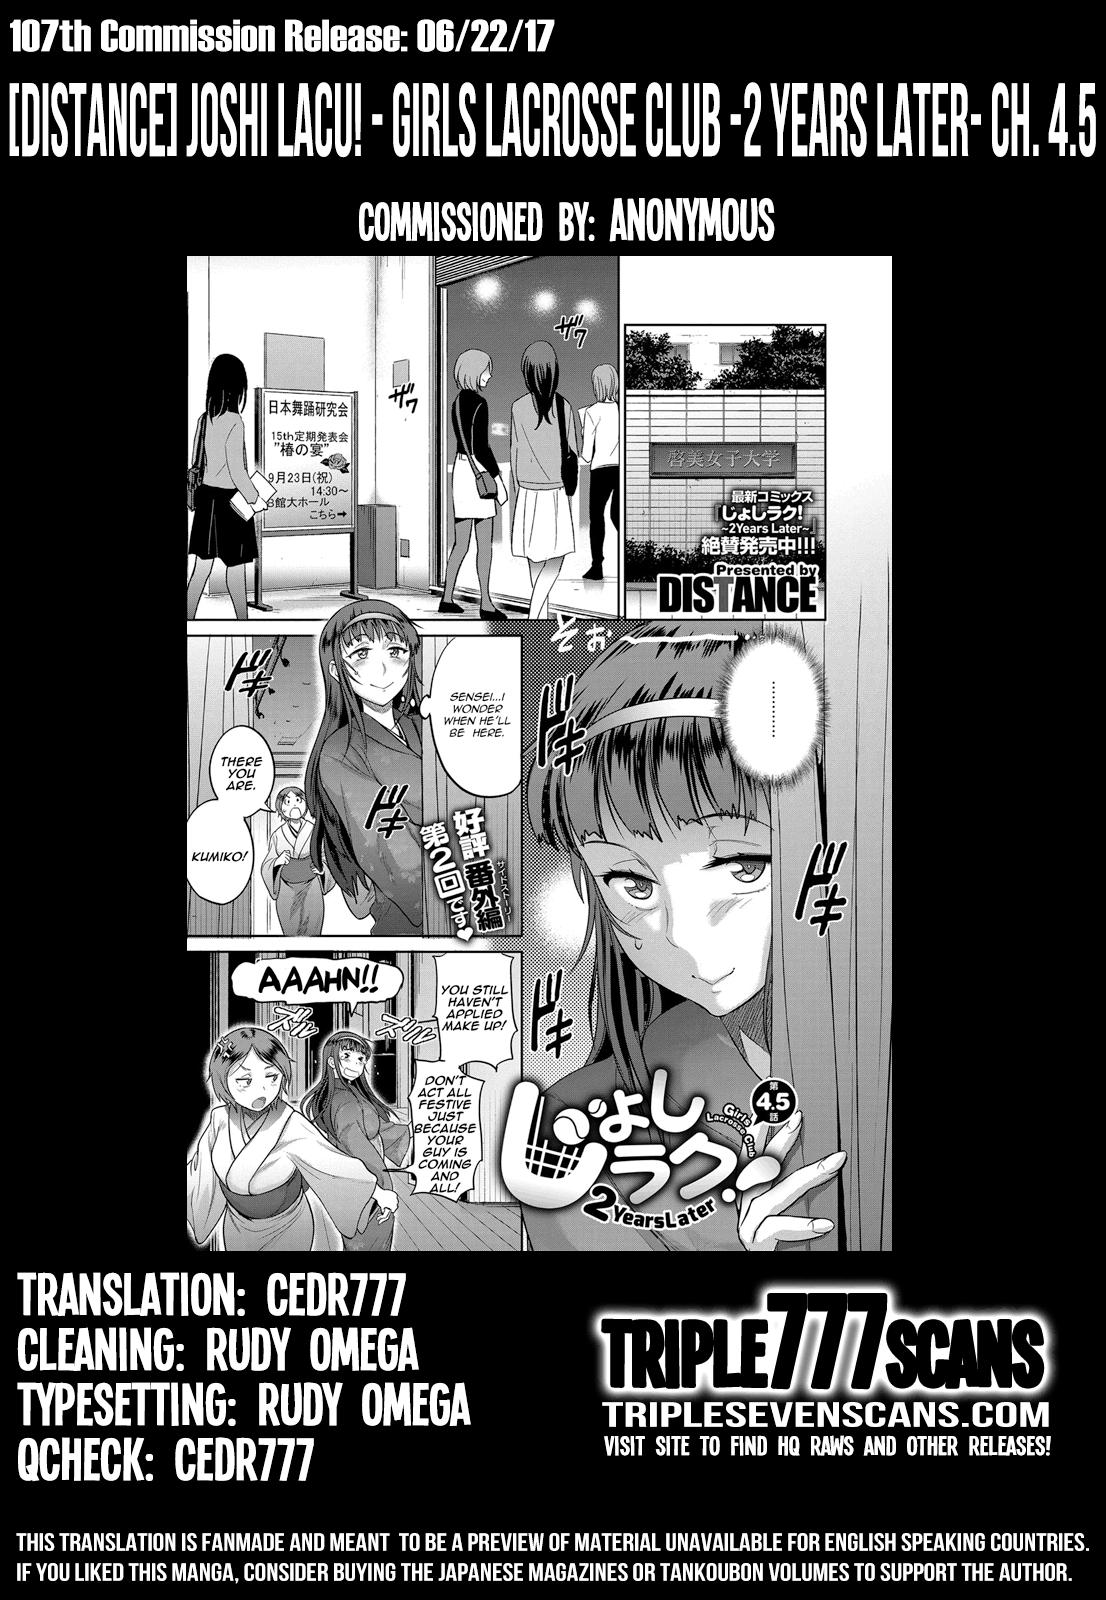 [DISTANCE] Joshi Lacu! - Girls Lacrosse Club ~2 Years Later~ Ch. 4.5 (COMIC ExE 07) [English] [TripleSevenScans] [Digital] 18